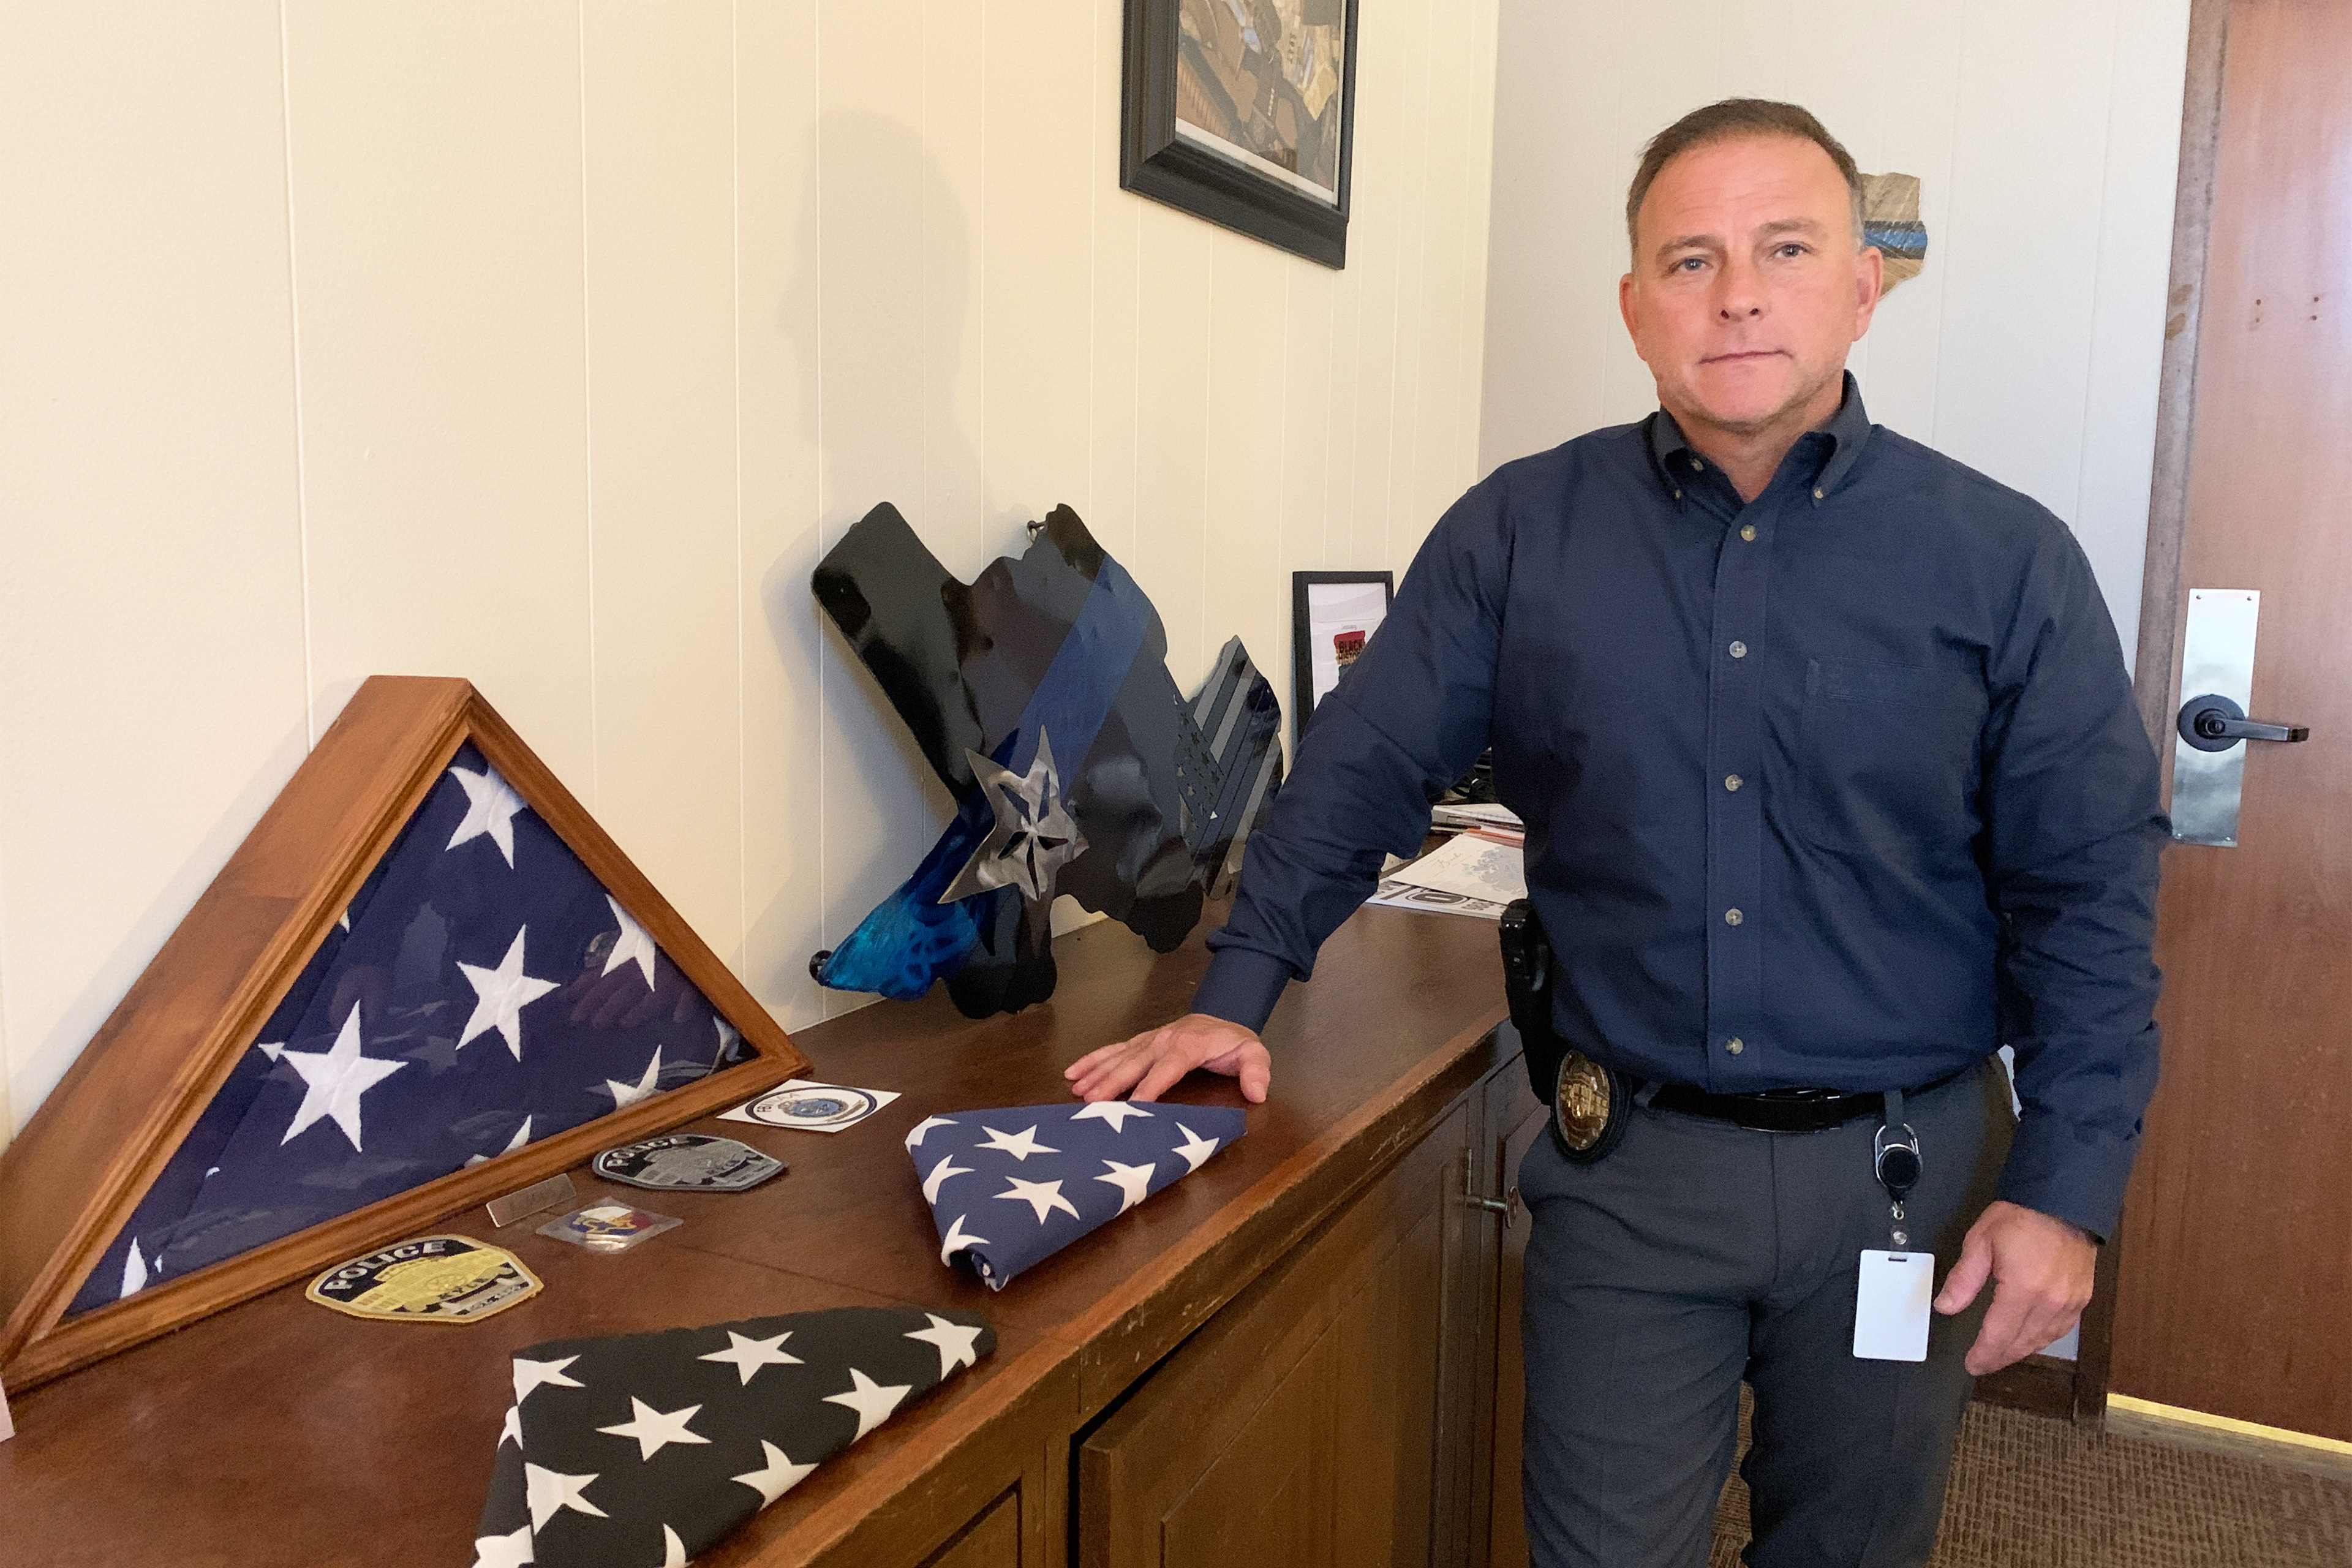 A photo shows Jeff Barnett standing indoors next to several folded American flags.